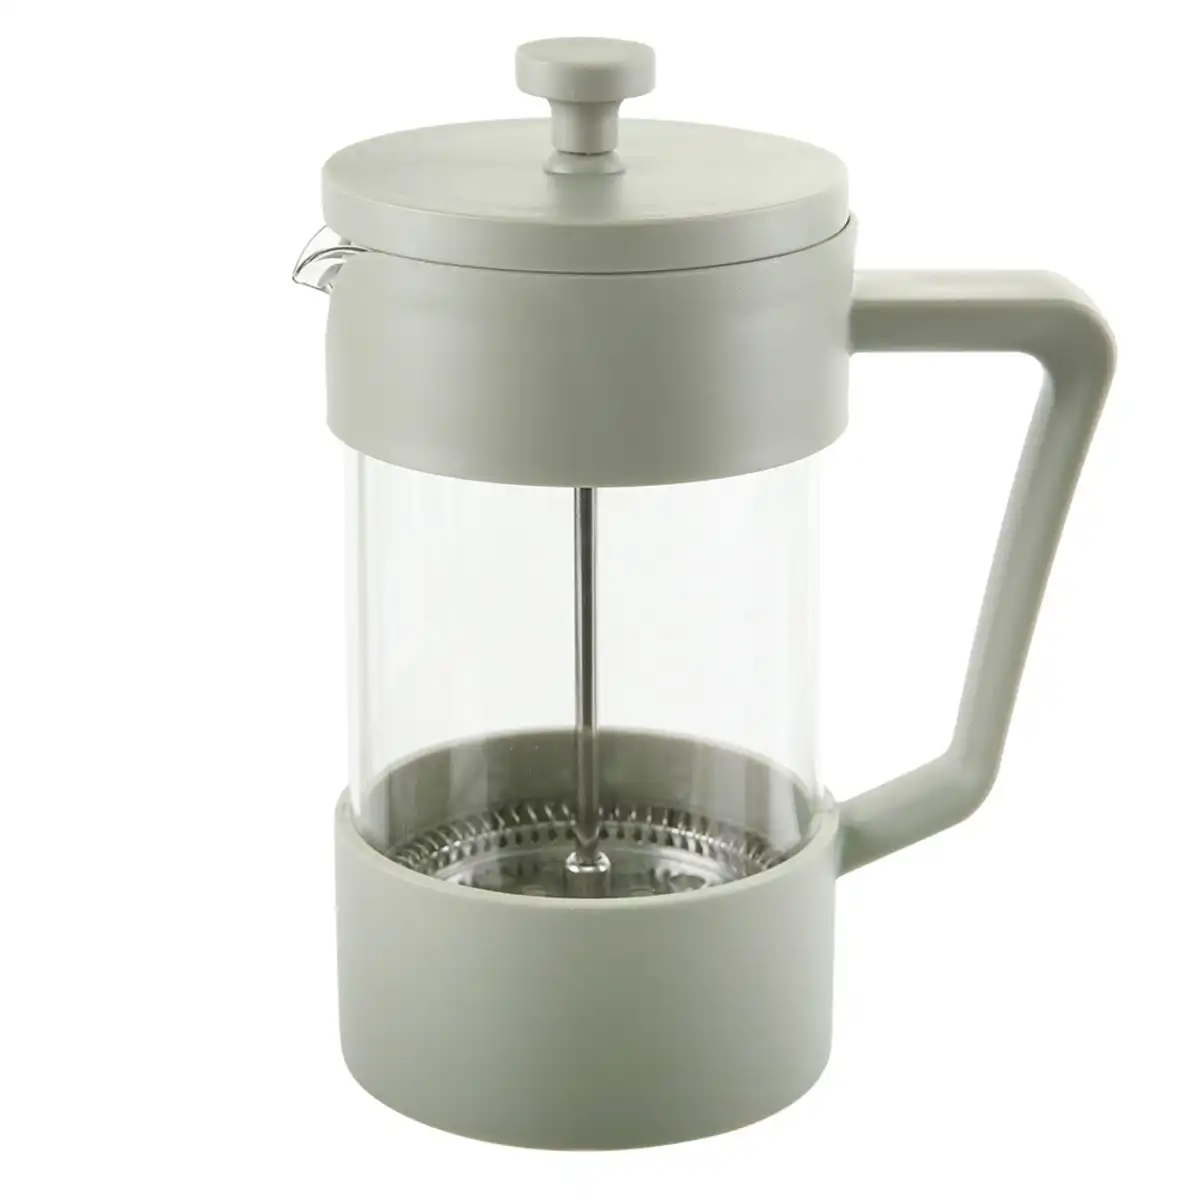 CASABARISTA OSLO COFFEE PLUNGER 5 CUP 600ml - TAUPE